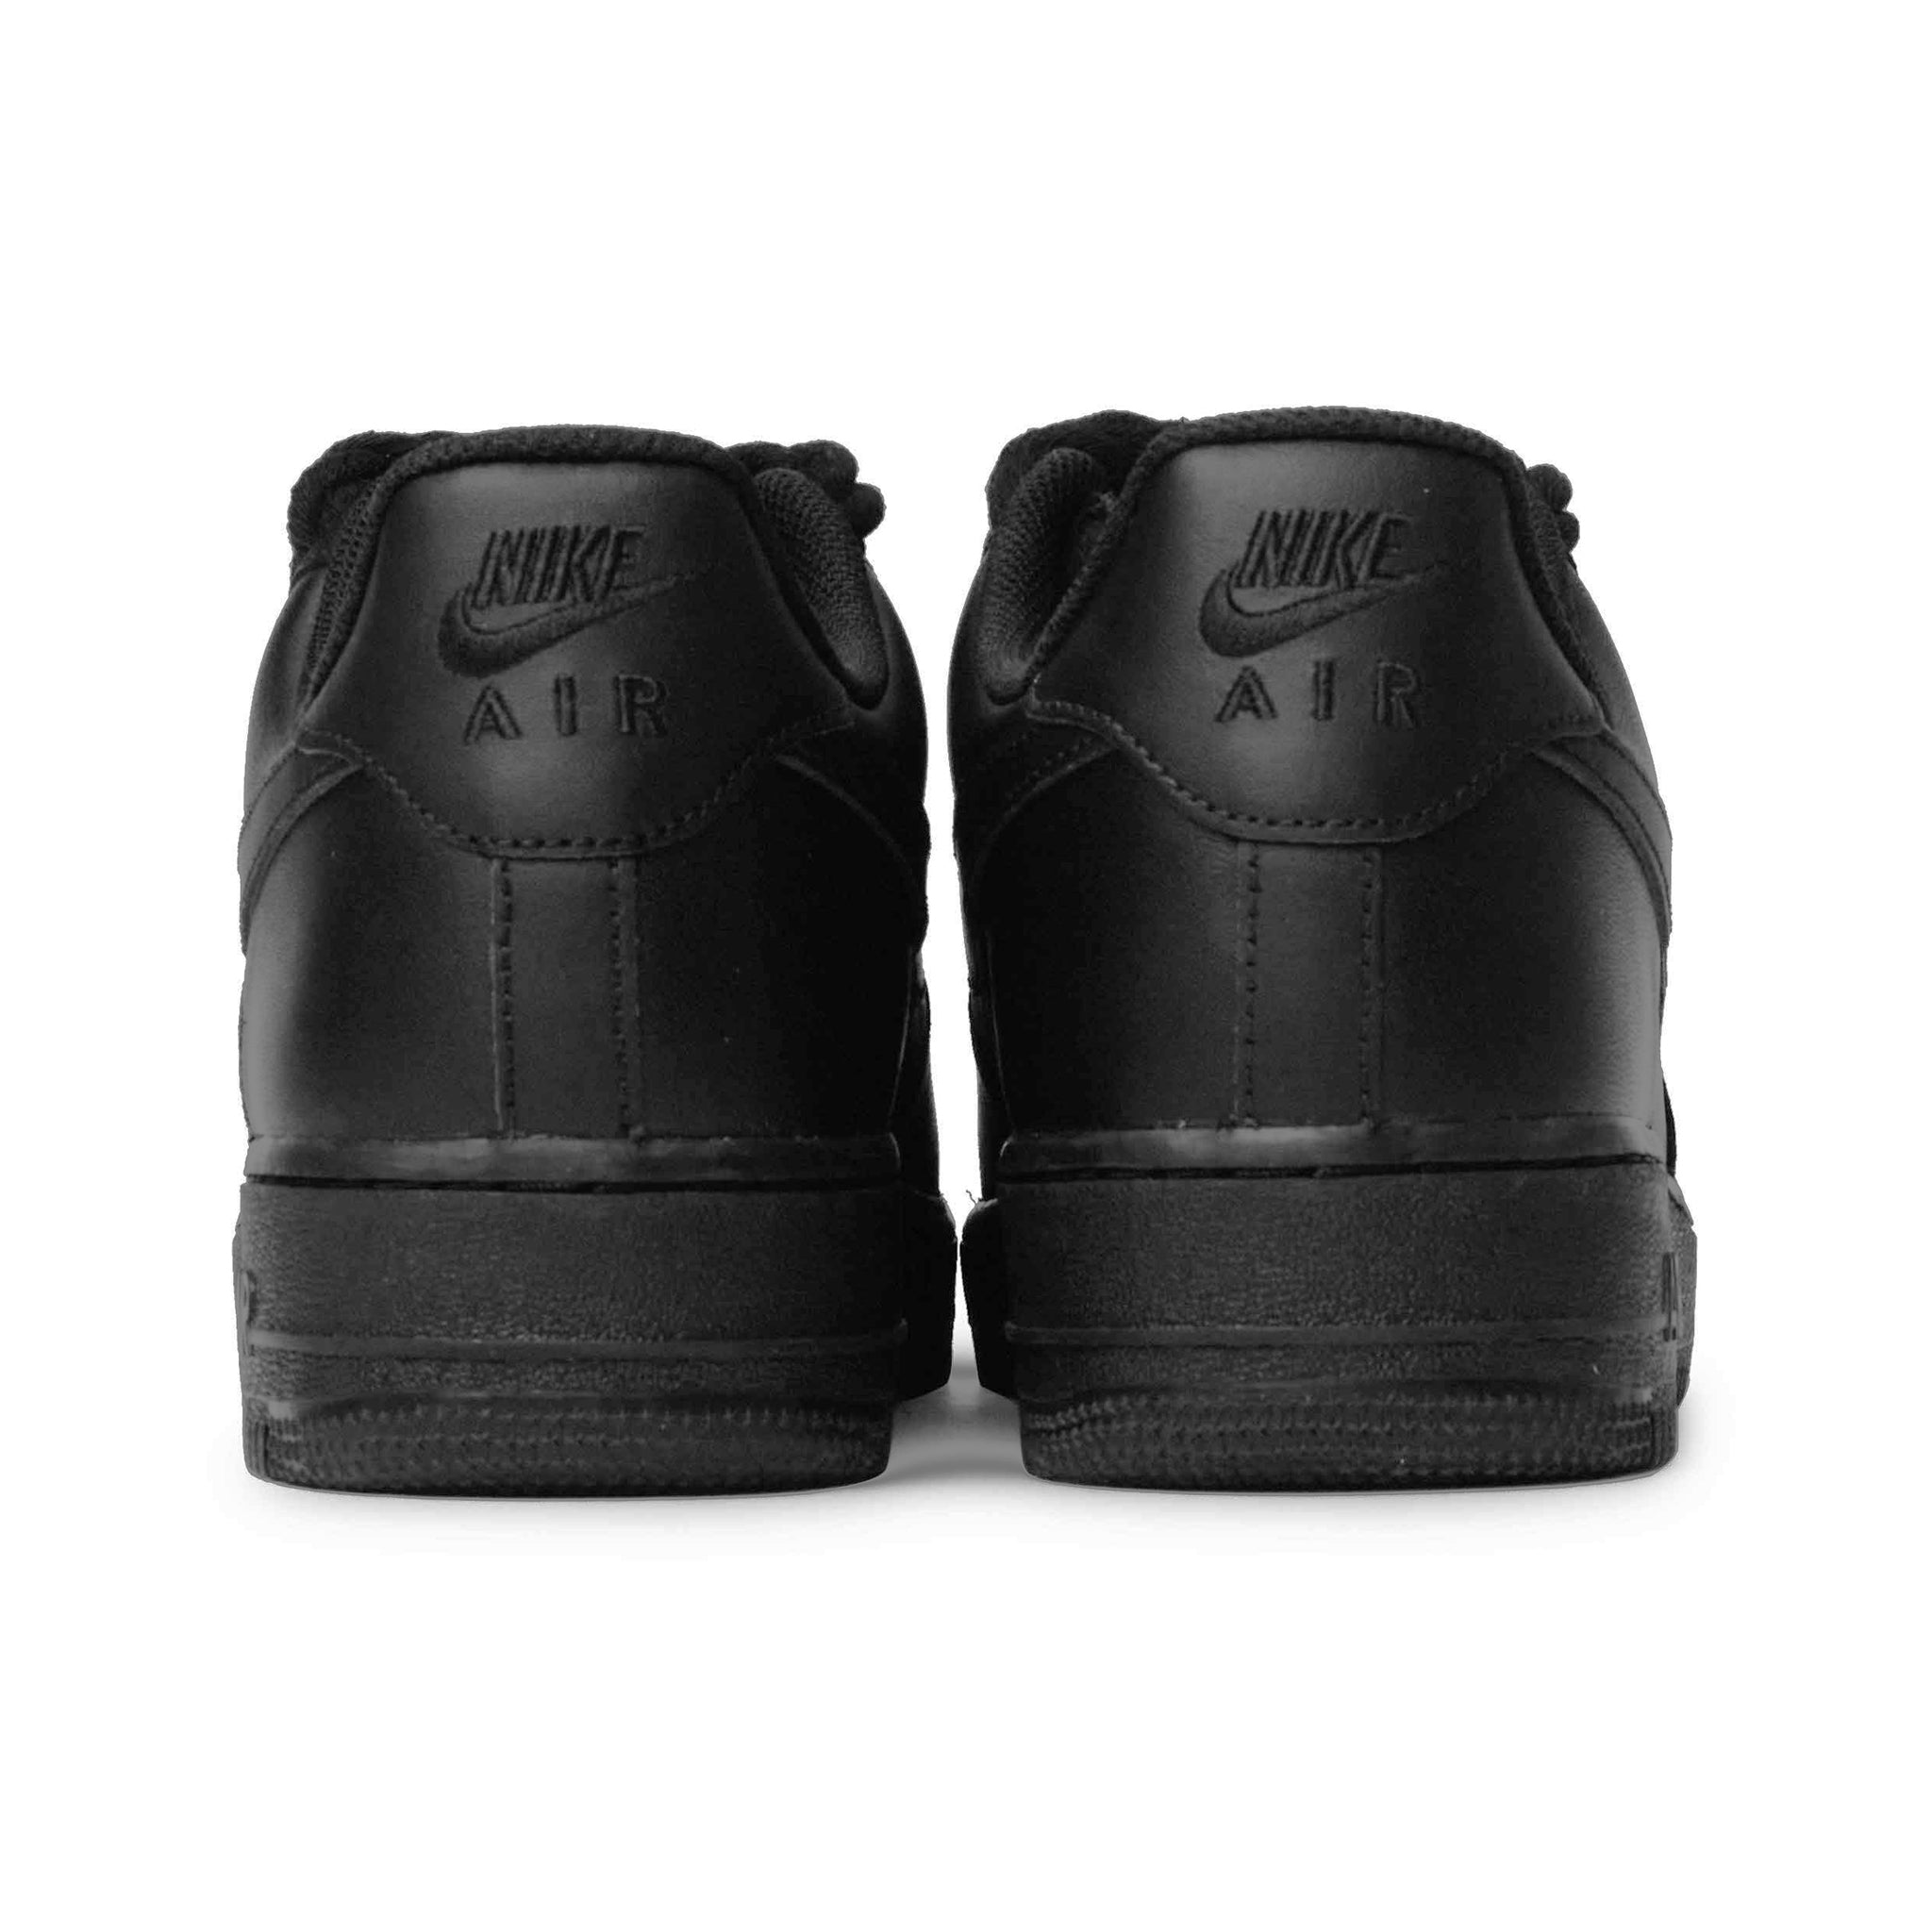 Back view of Nike Air Force 1 Low Rope Lace Black (GS) 314192-009